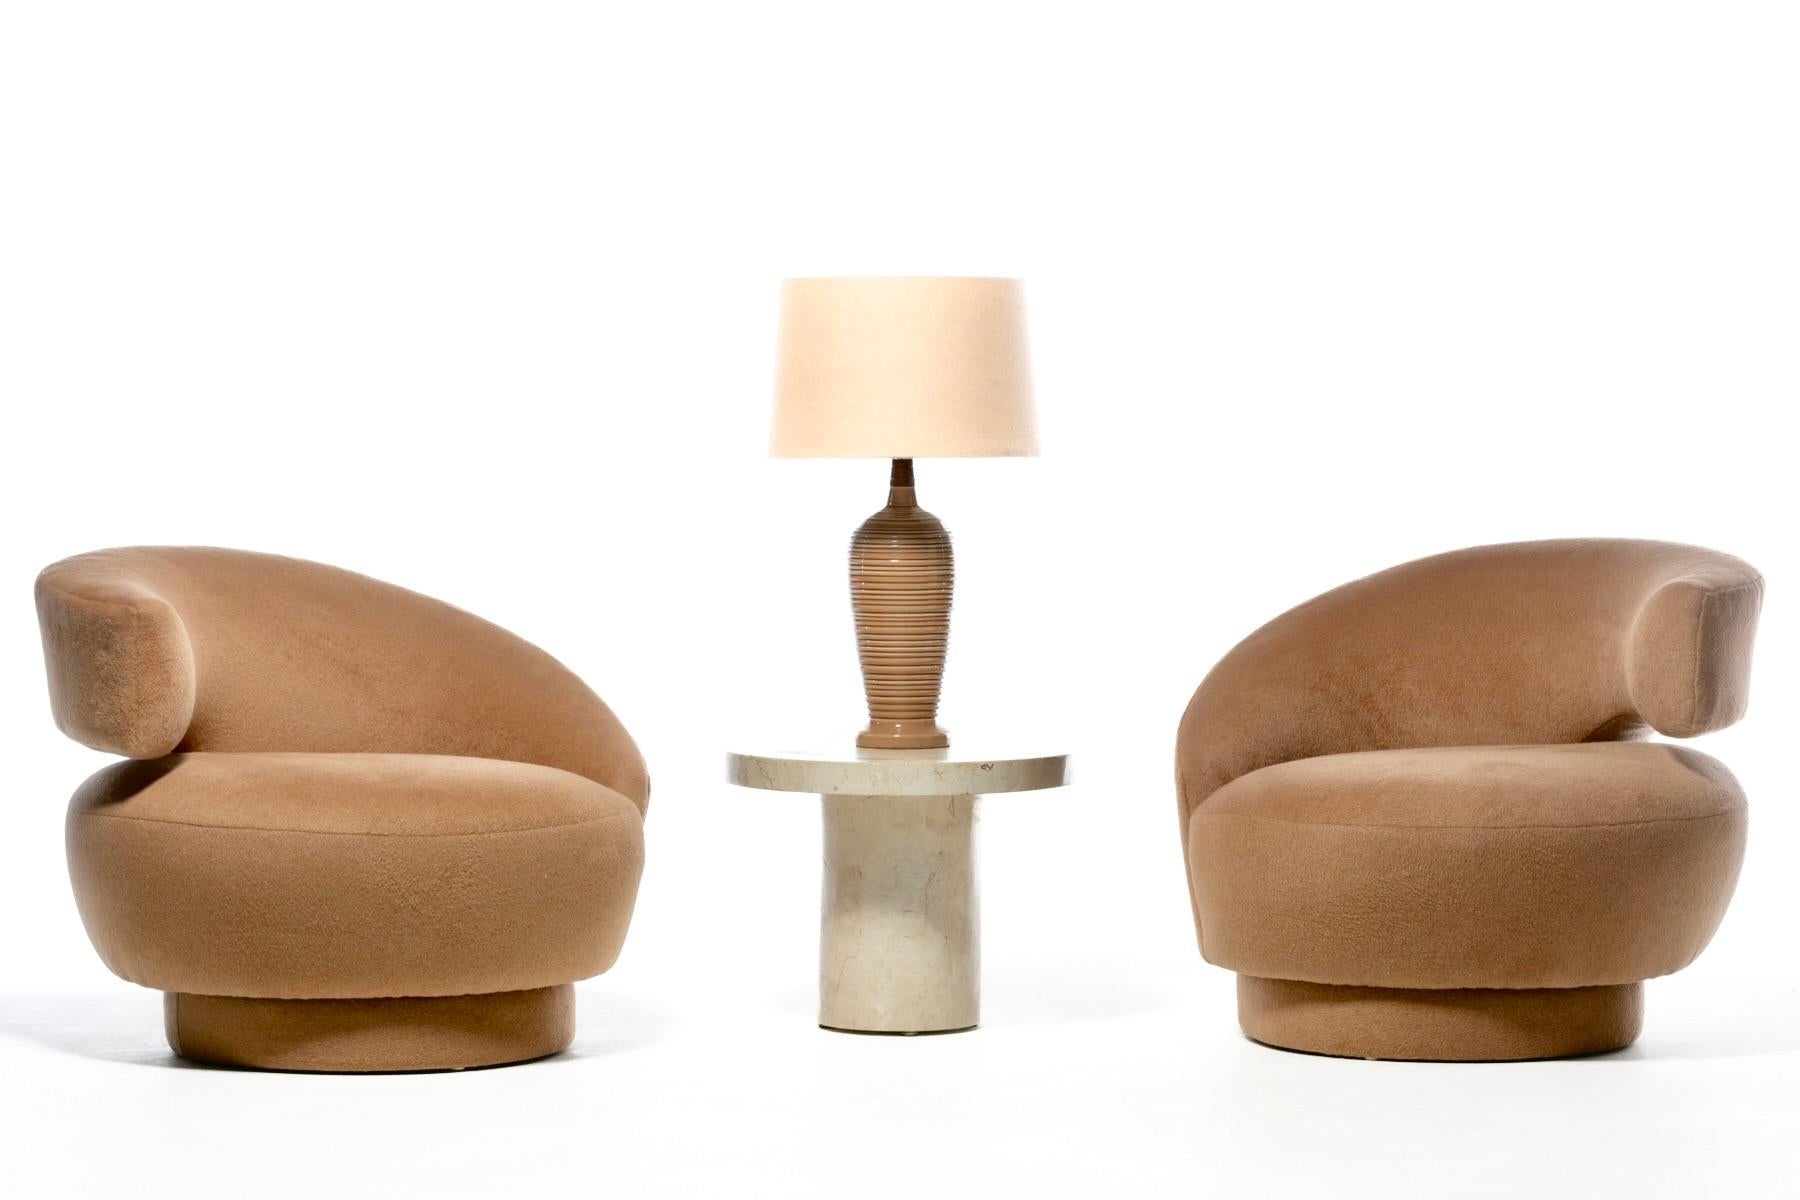 American Vladimir Kagan Caterpillar Chairs Newly Upholstered in Camel Color Mohair For Sale